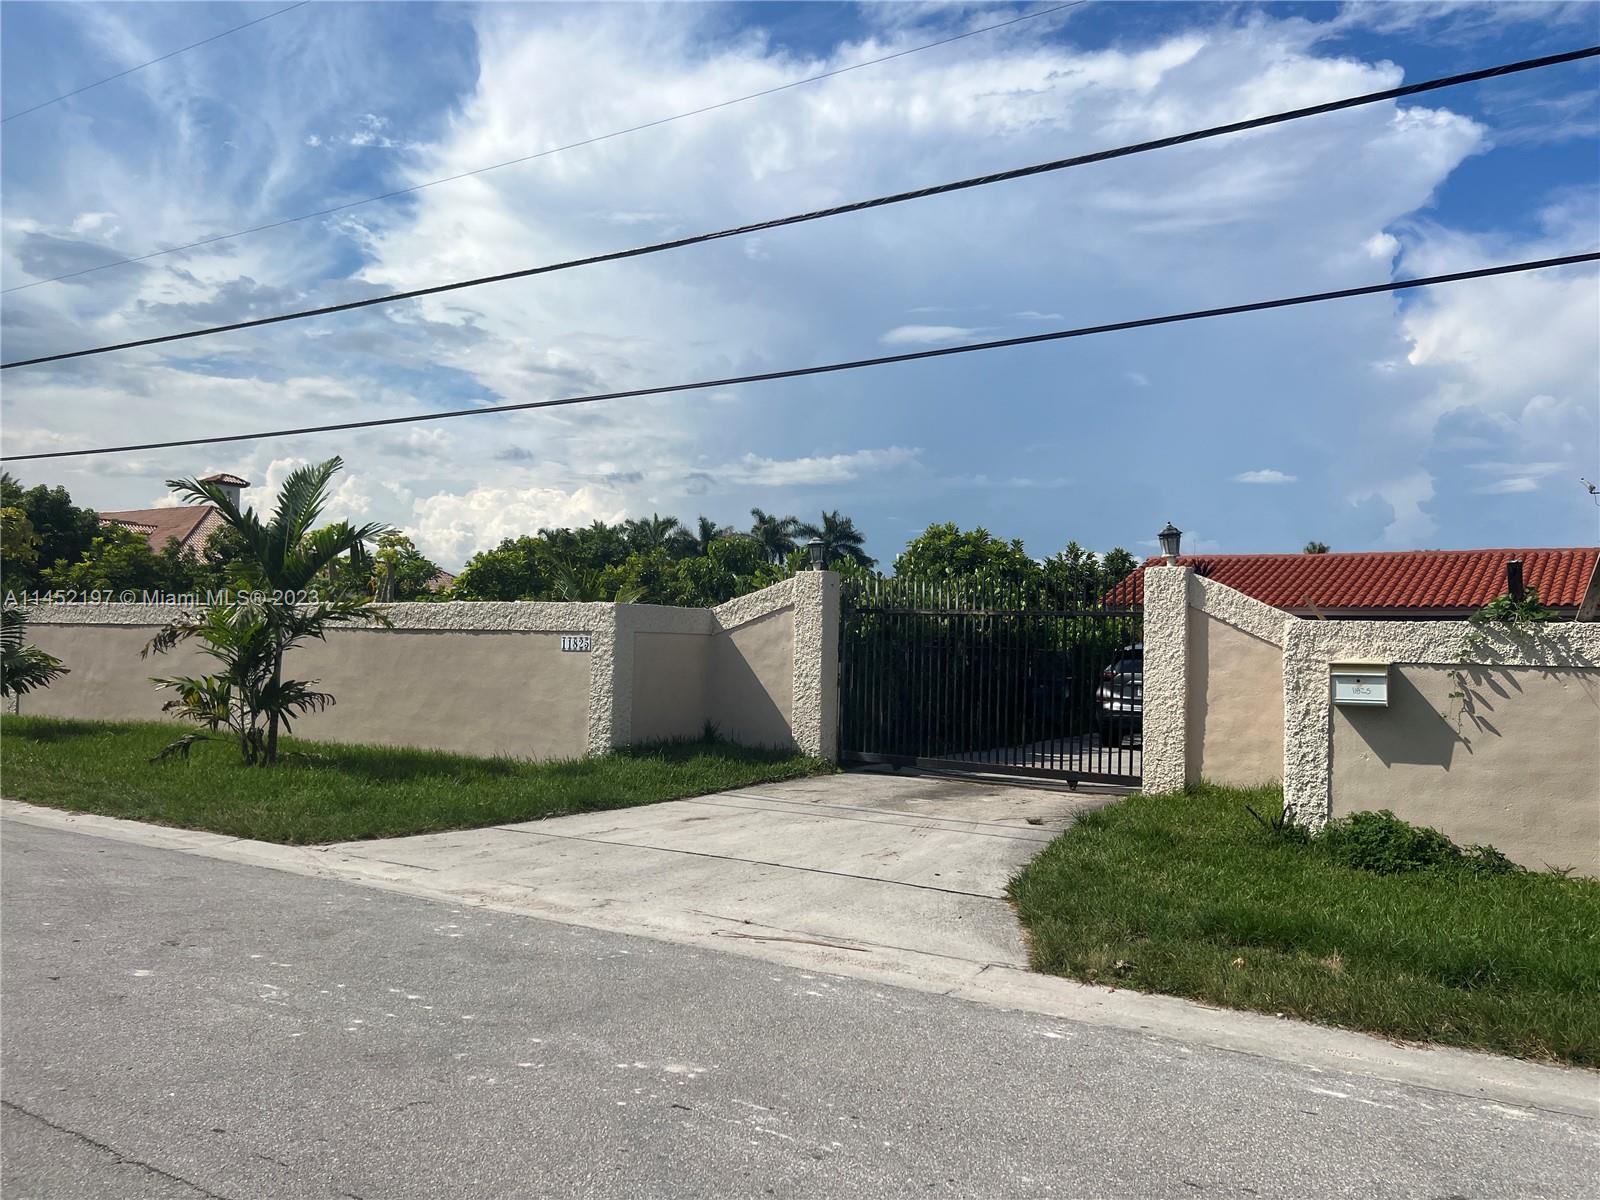 11825 SW 51st St, Miami, Florida 33175, 6 Bedrooms Bedrooms, ,4 BathroomsBathrooms,Residential,For Sale,11825 SW 51st St,A11452197